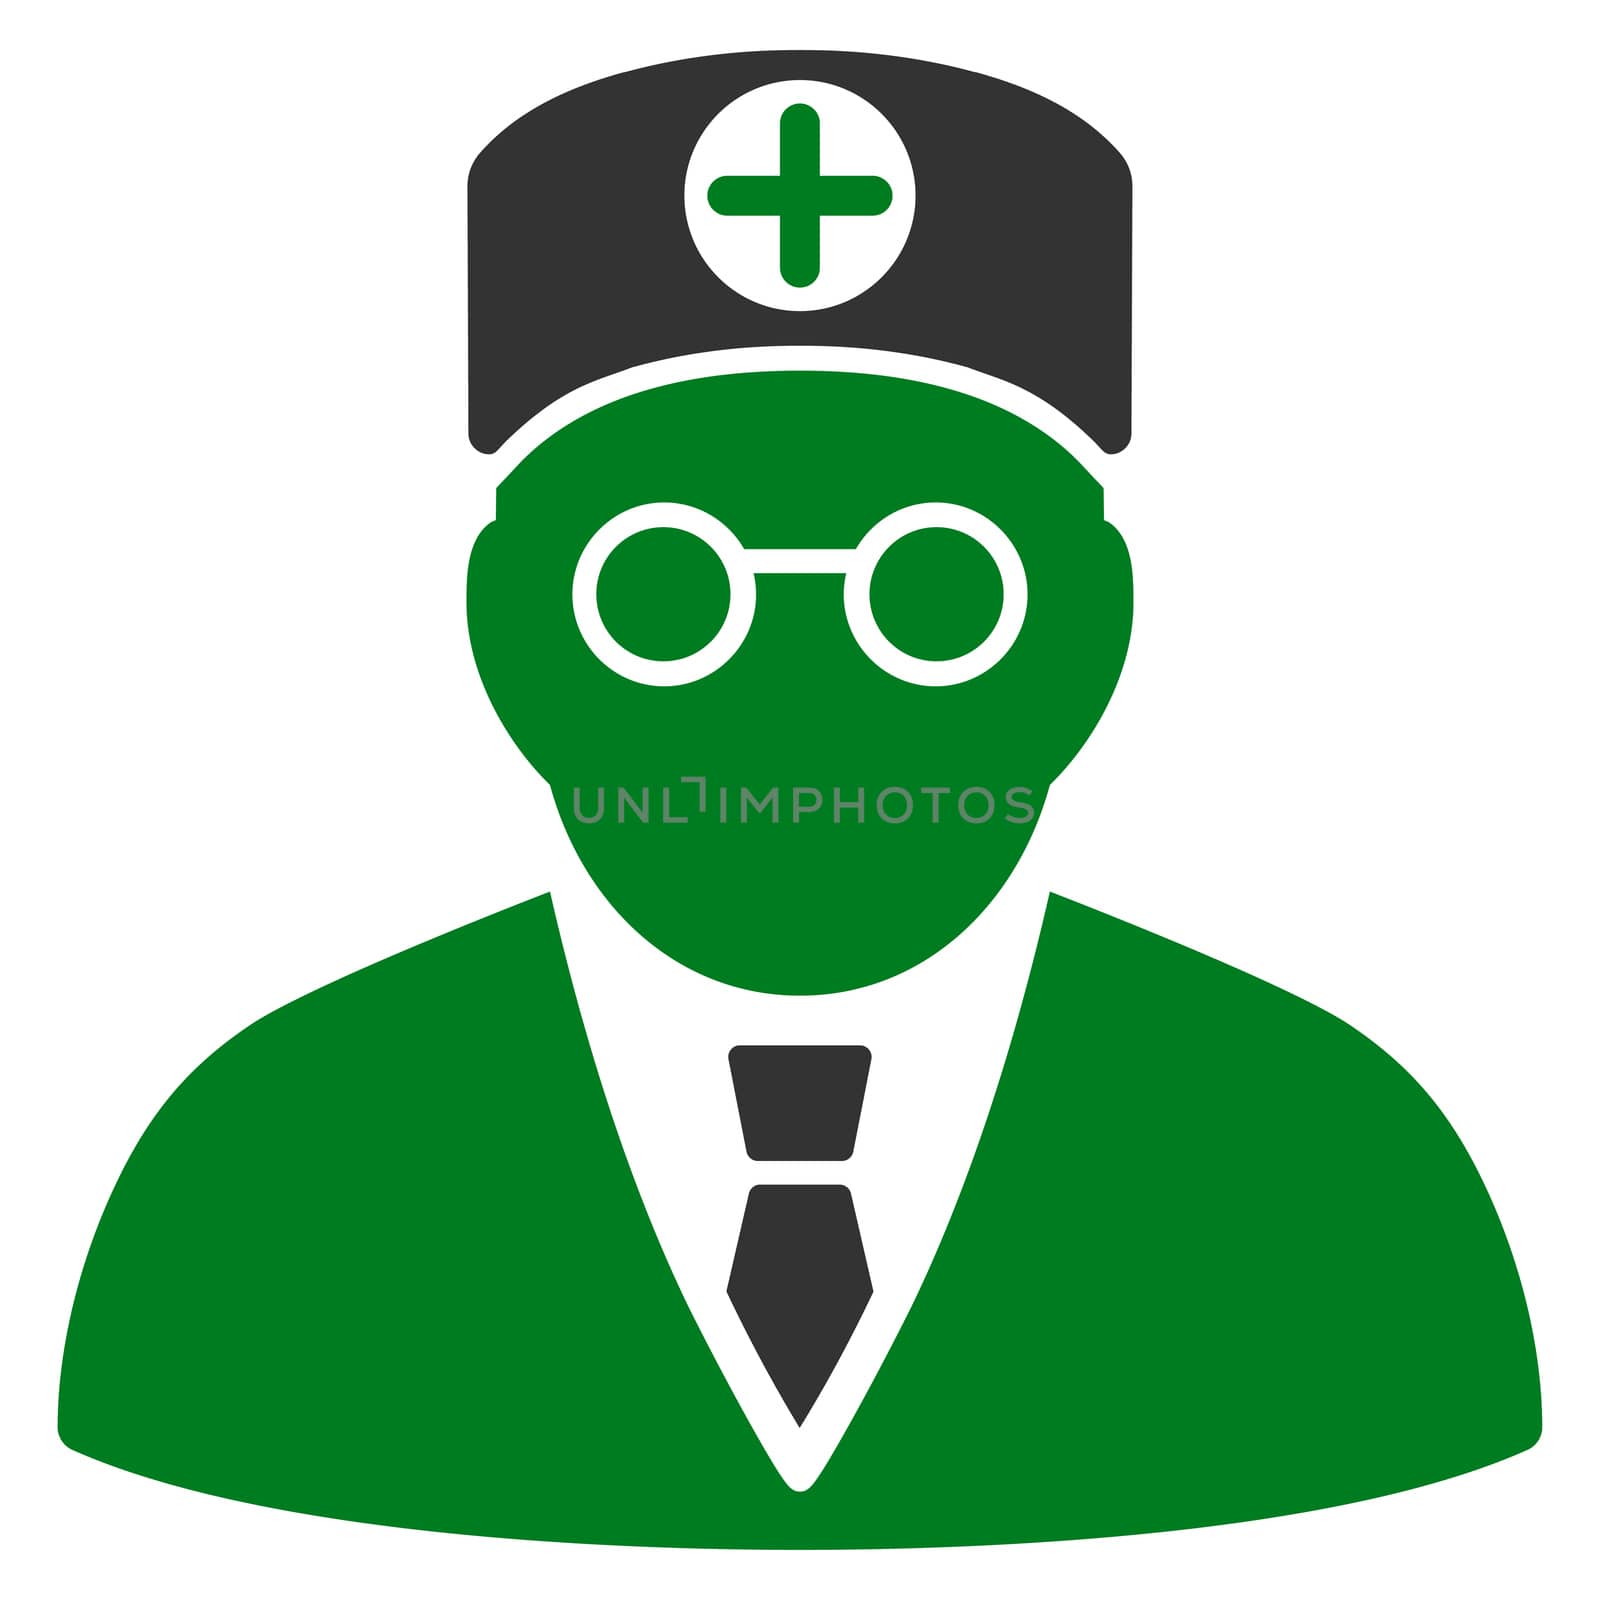 Head Physician raster icon. Style is bicolor flat symbol, green and gray colors, rounded angles, white background.